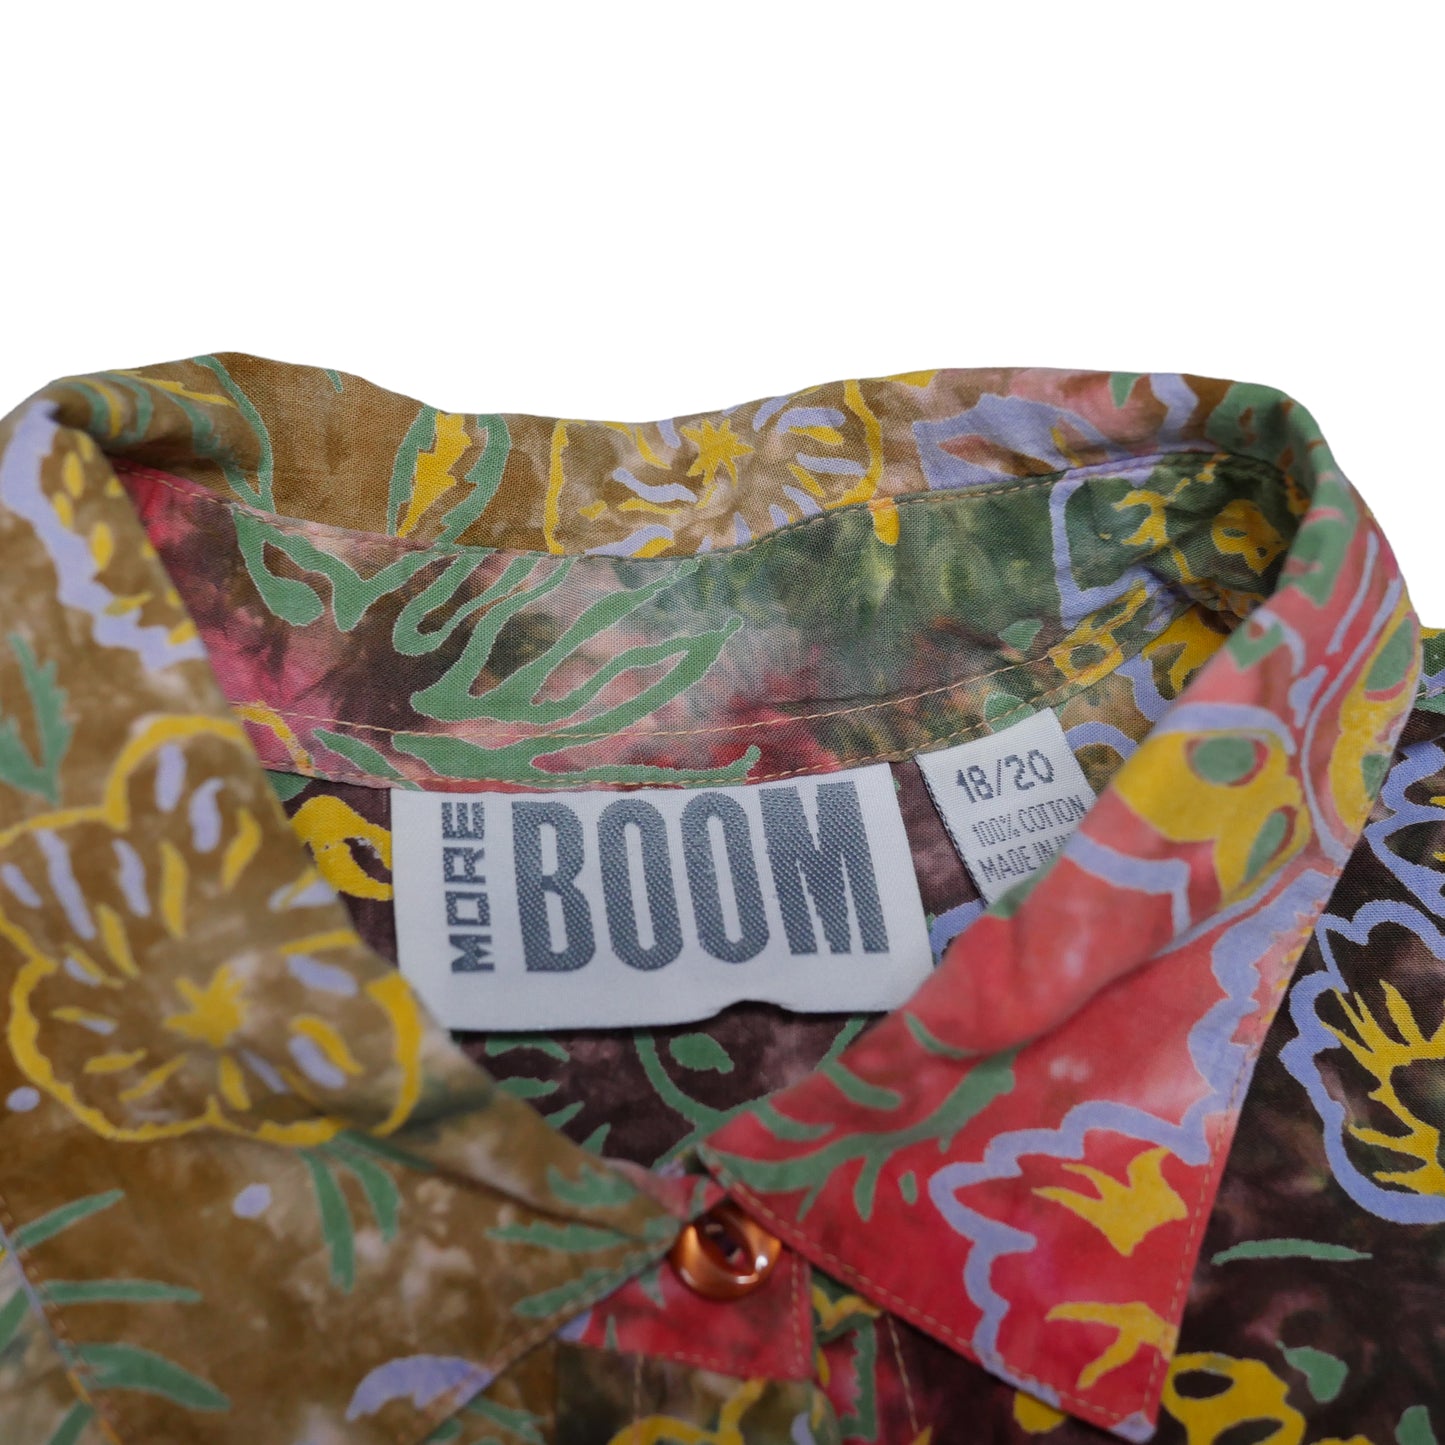 Moore Boom Floral Tie Dye Button Up - XL